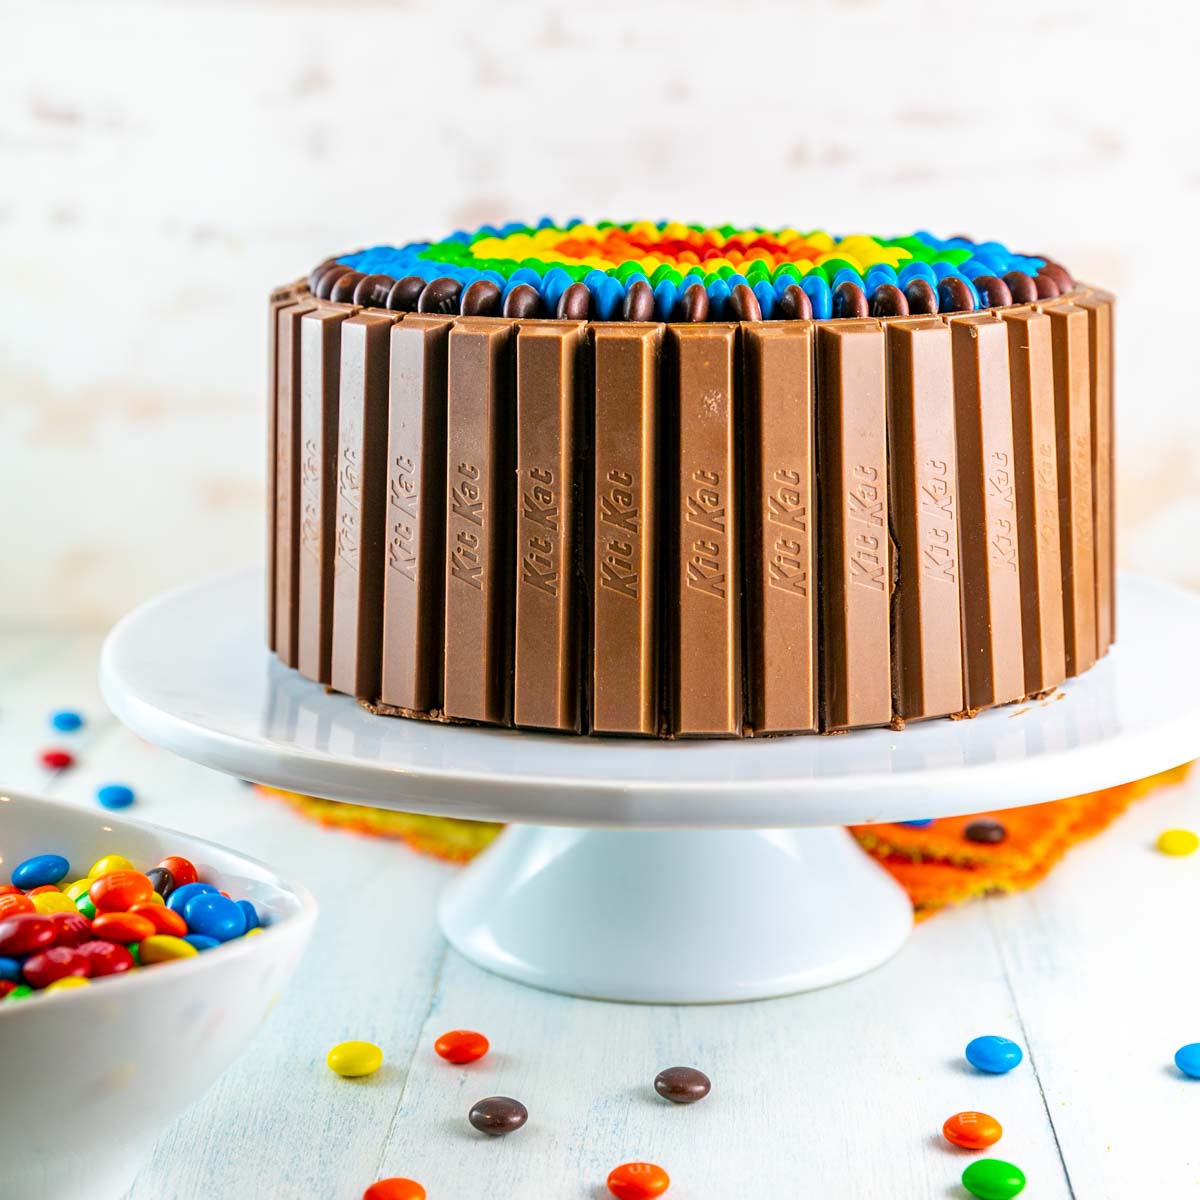 M&M'S peanut butter cake with peanut butter frosting recipe